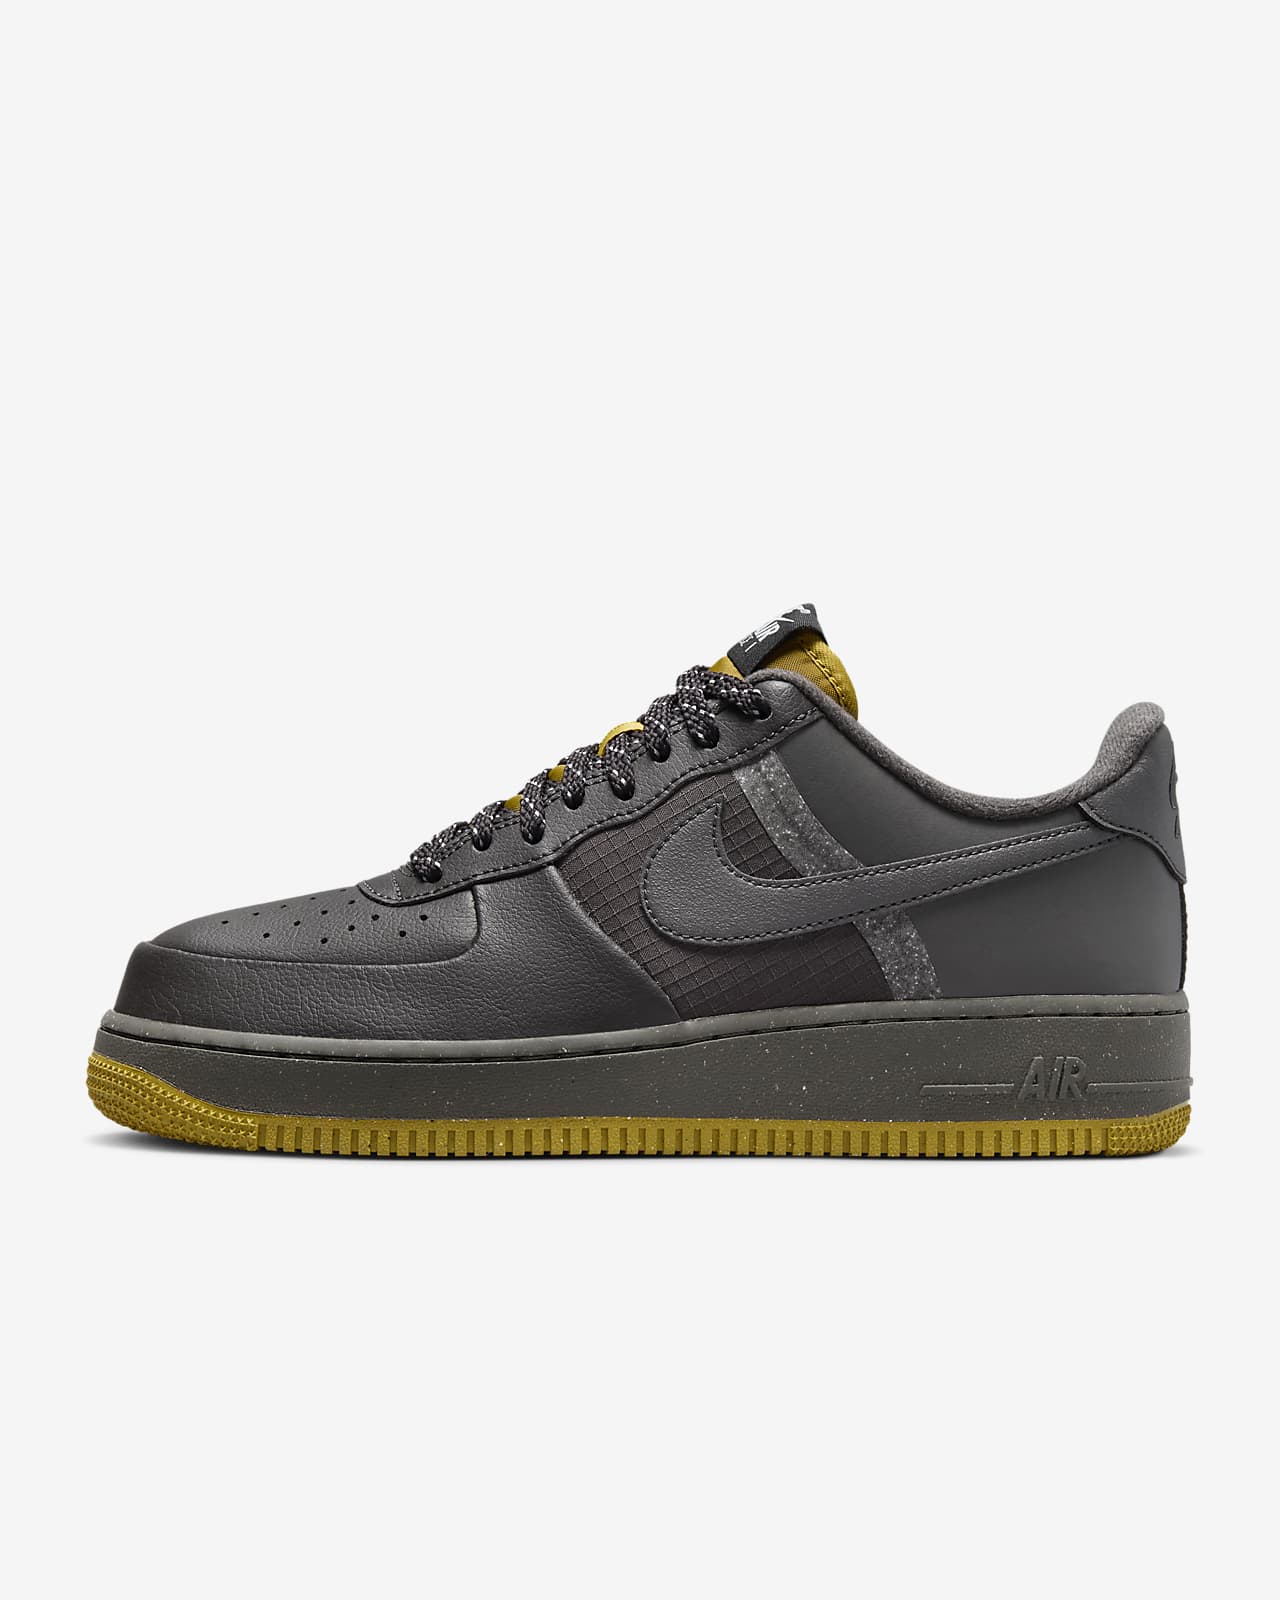 Nike Air Force 1 07 LV8 Mens Shoes Review